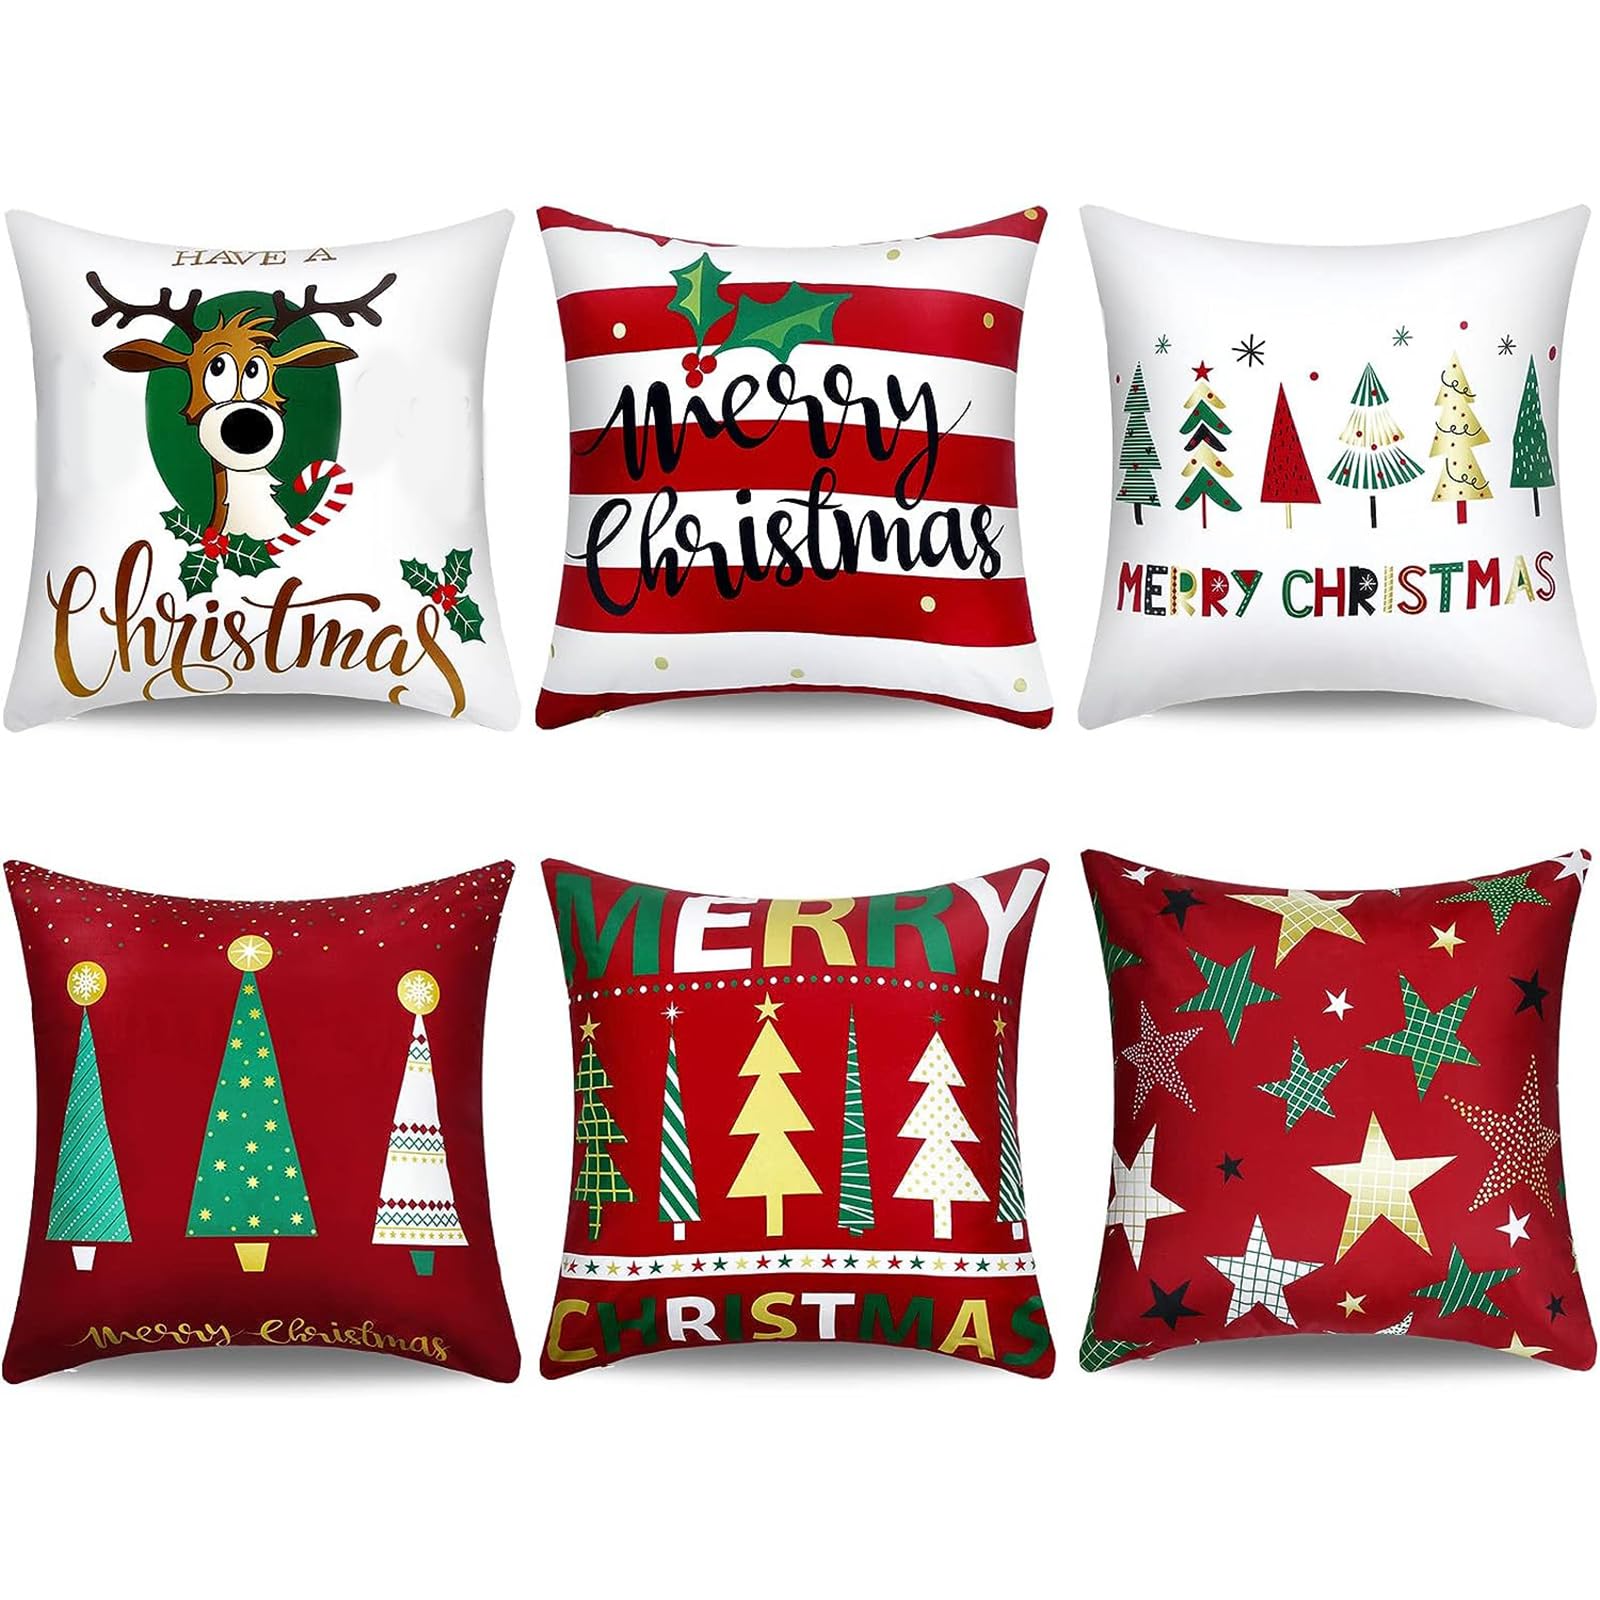 Boao 6 Pieces Christmas Pillow Cover Merry Christmas Throw Cushion Covers Tree Reindeer Star Pillow Case for Party Home Decorati